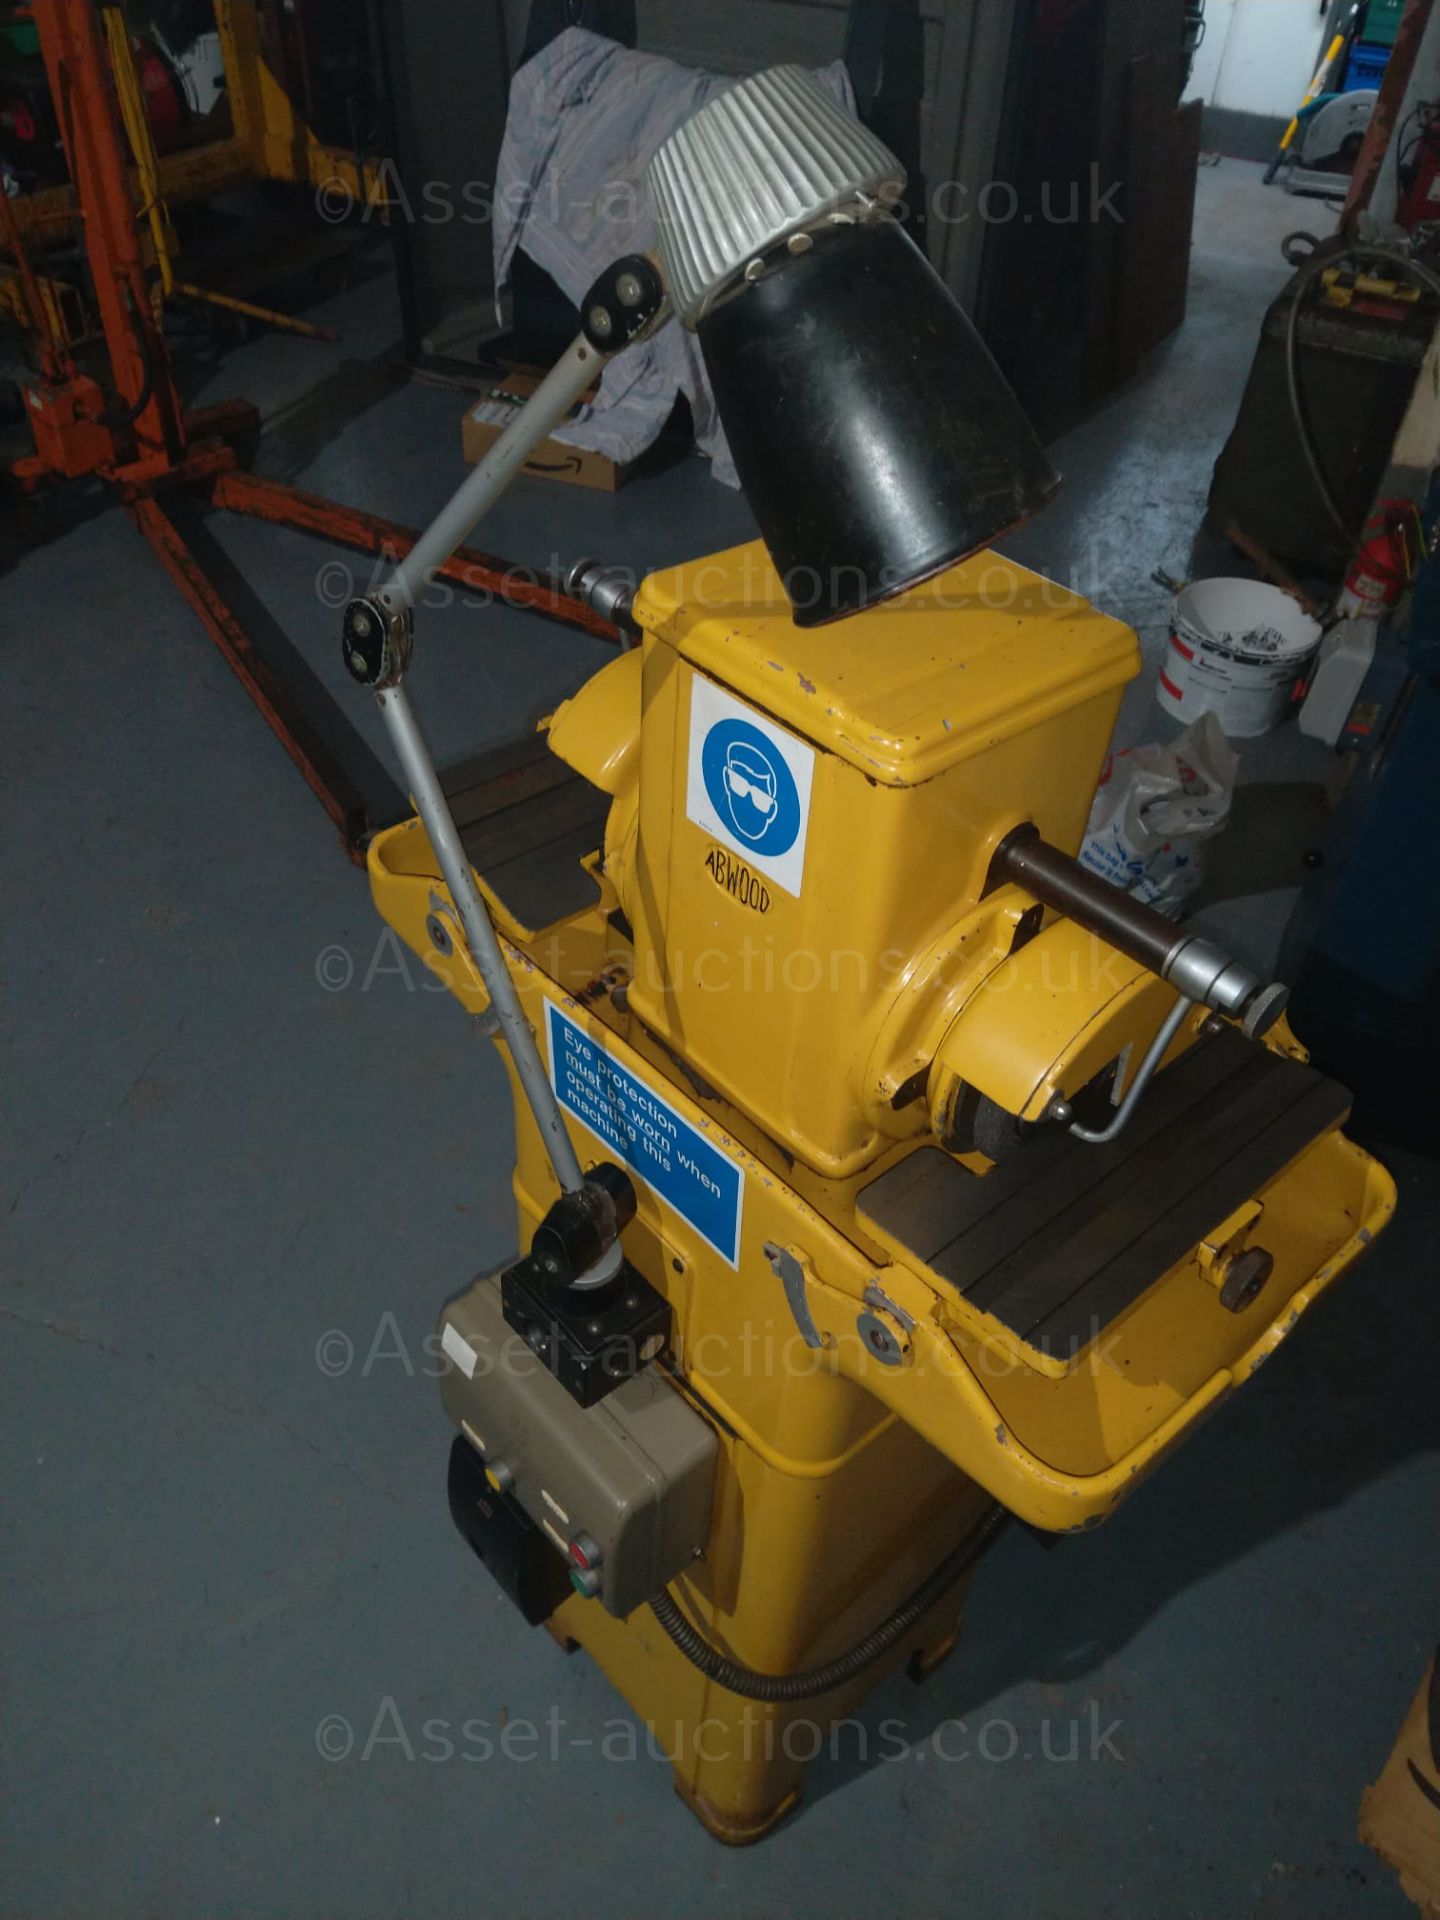 ABWOOD TOOL GRINDER LAPPING MACHINE, DOUBLE HEADED, COOLANT TANK, IN GOOD WORKIN GORDER *NO VAT* - Image 2 of 6